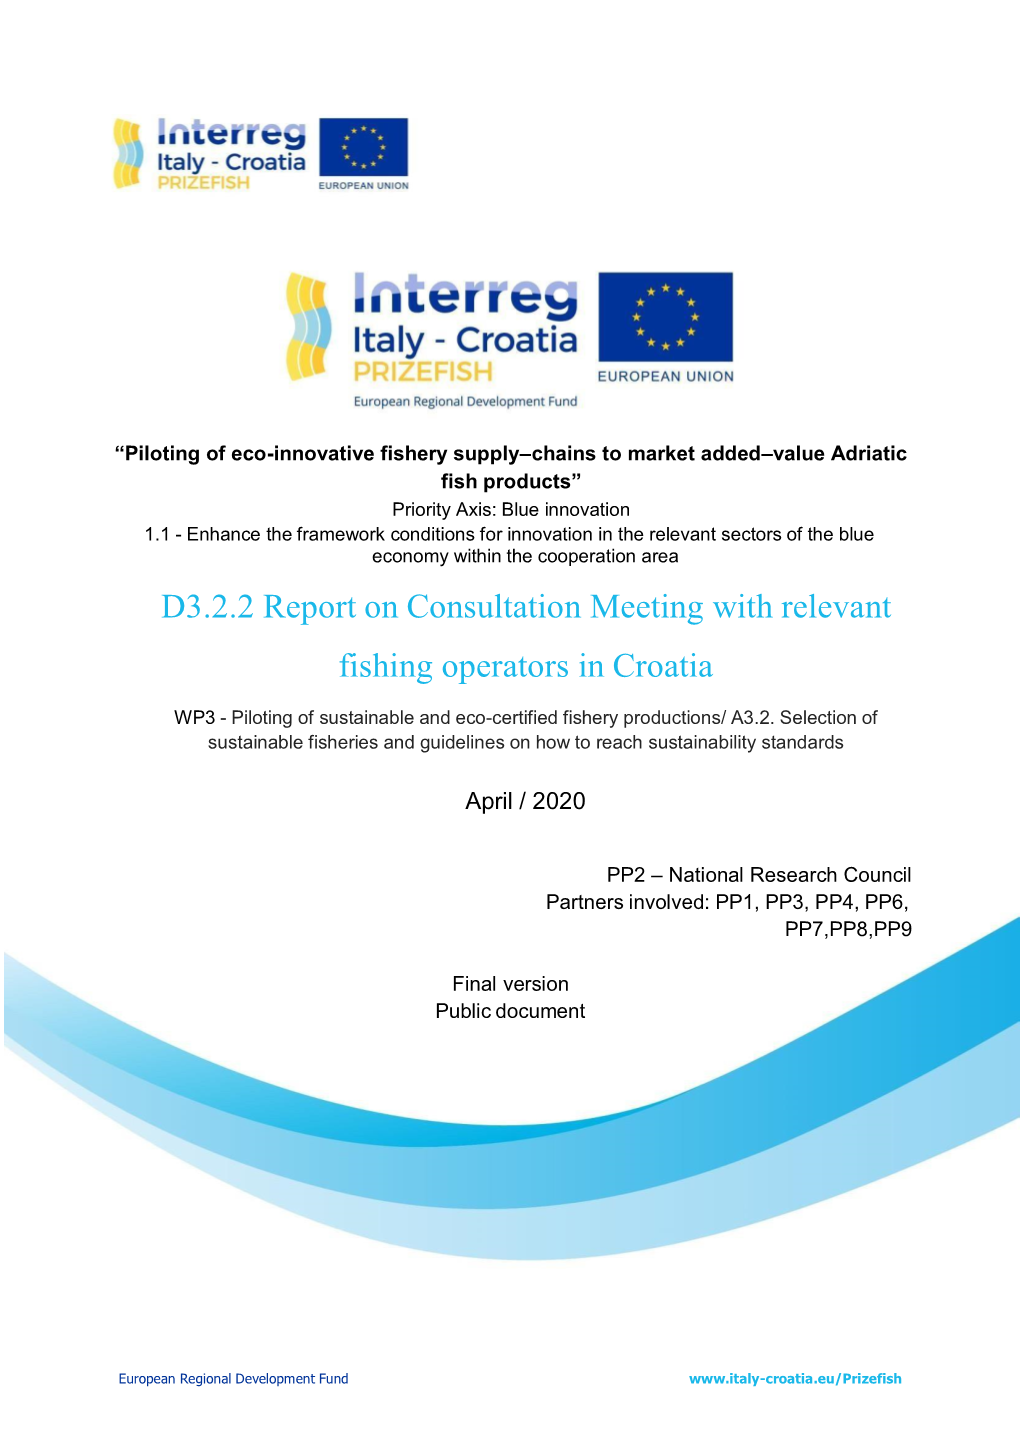 D3.2.2 Report on Consultation Meeting with Relevant Fishing Operators in Croatia